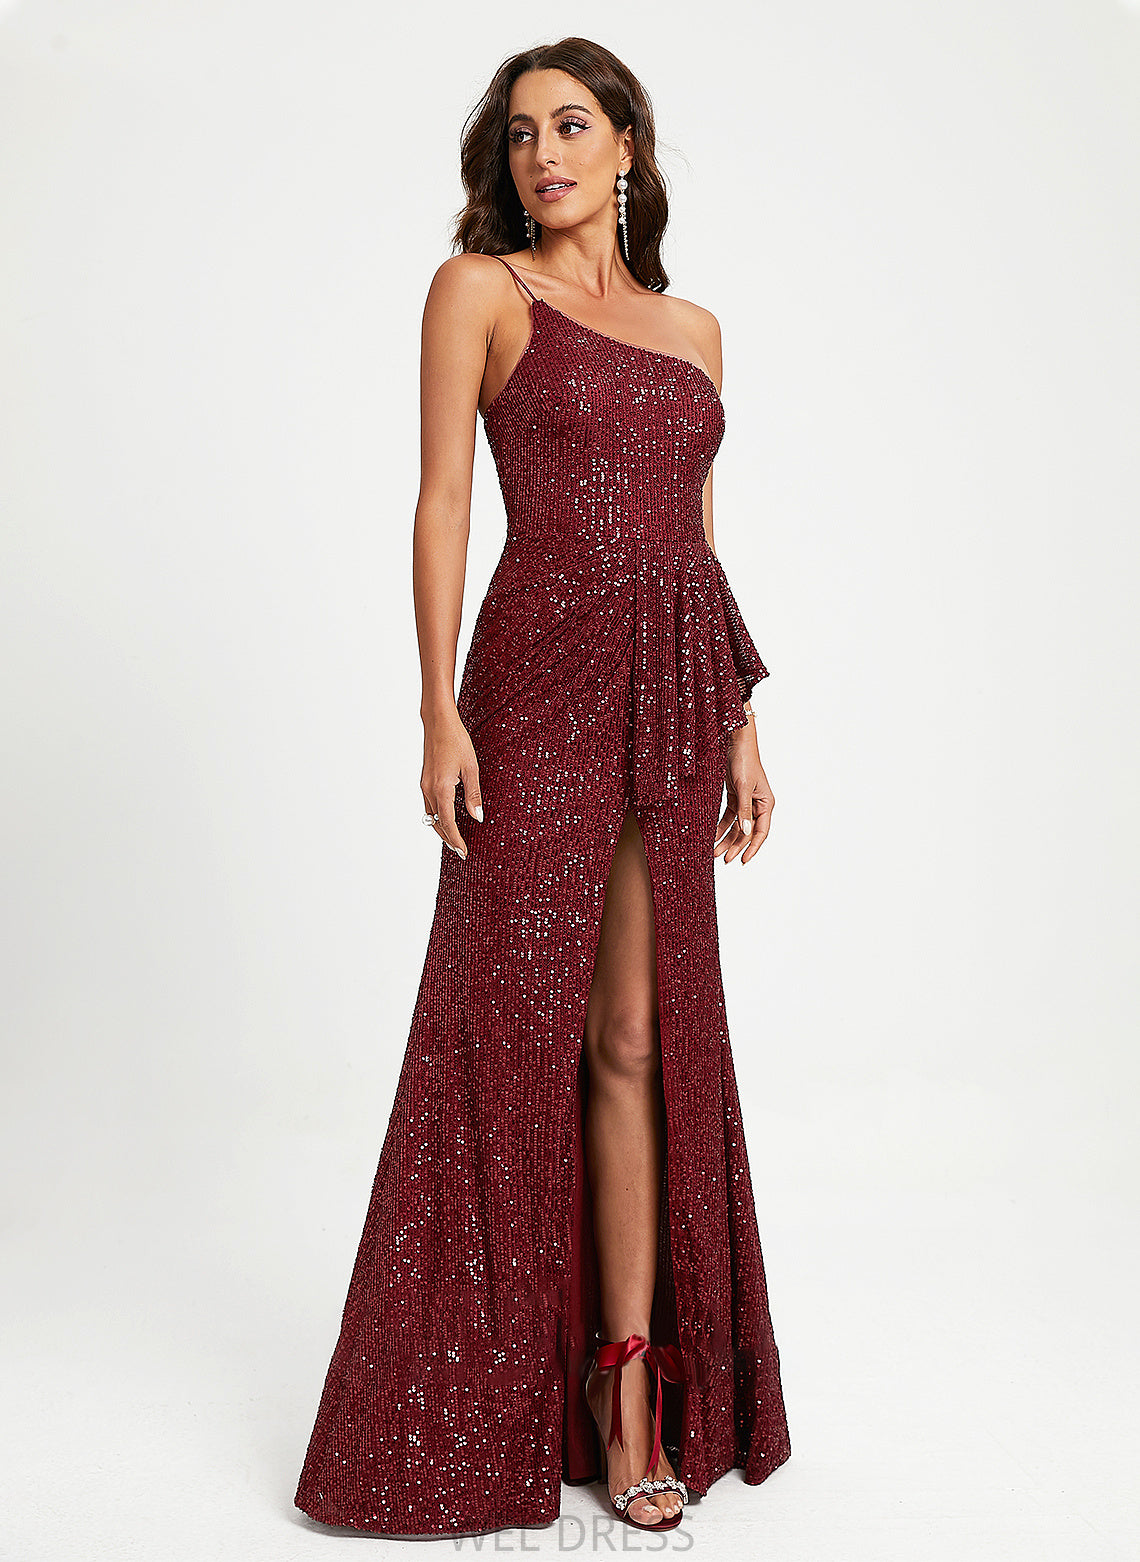 Jessica Sequins Prom Dresses Floor-Length Sheath/Column With Sequined One-Shoulder Ruffle